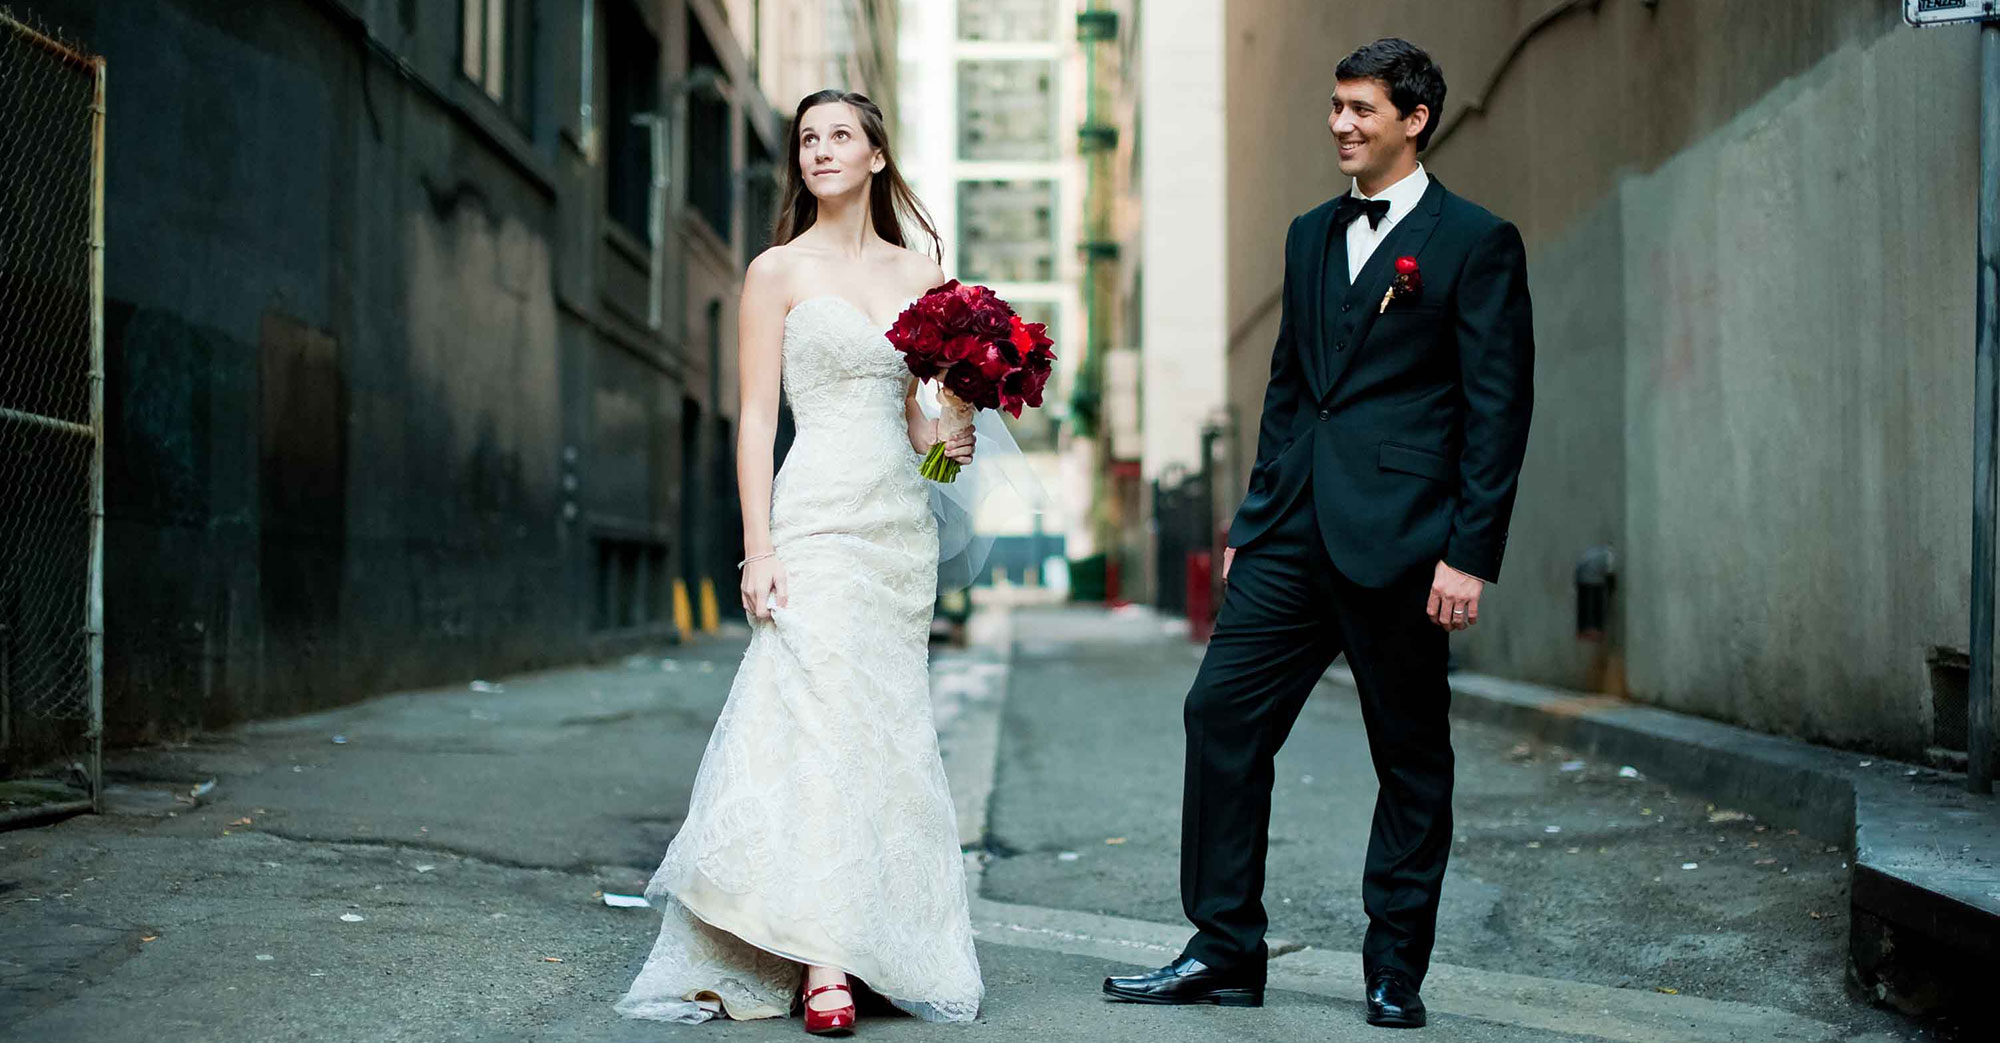 Briana & Dave’s Downtown L.A. Wedding featured slider image